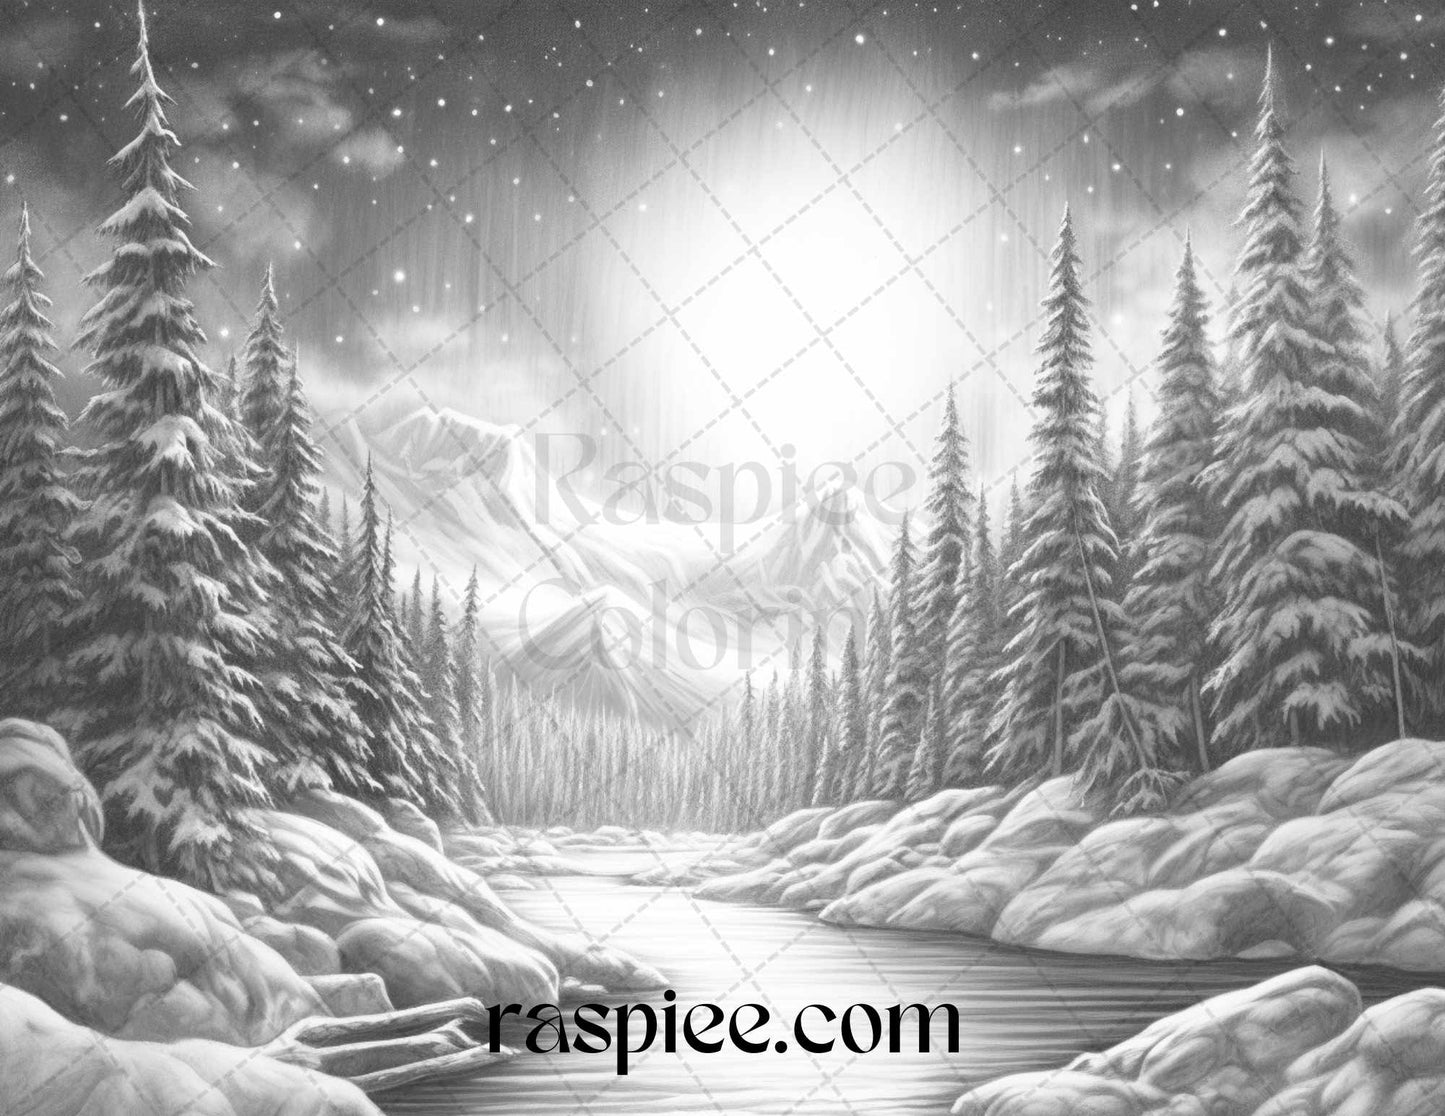 Aurora Borealis Landscape Grayscale Coloring Pages for Adults, Printable PDF File Instant Download